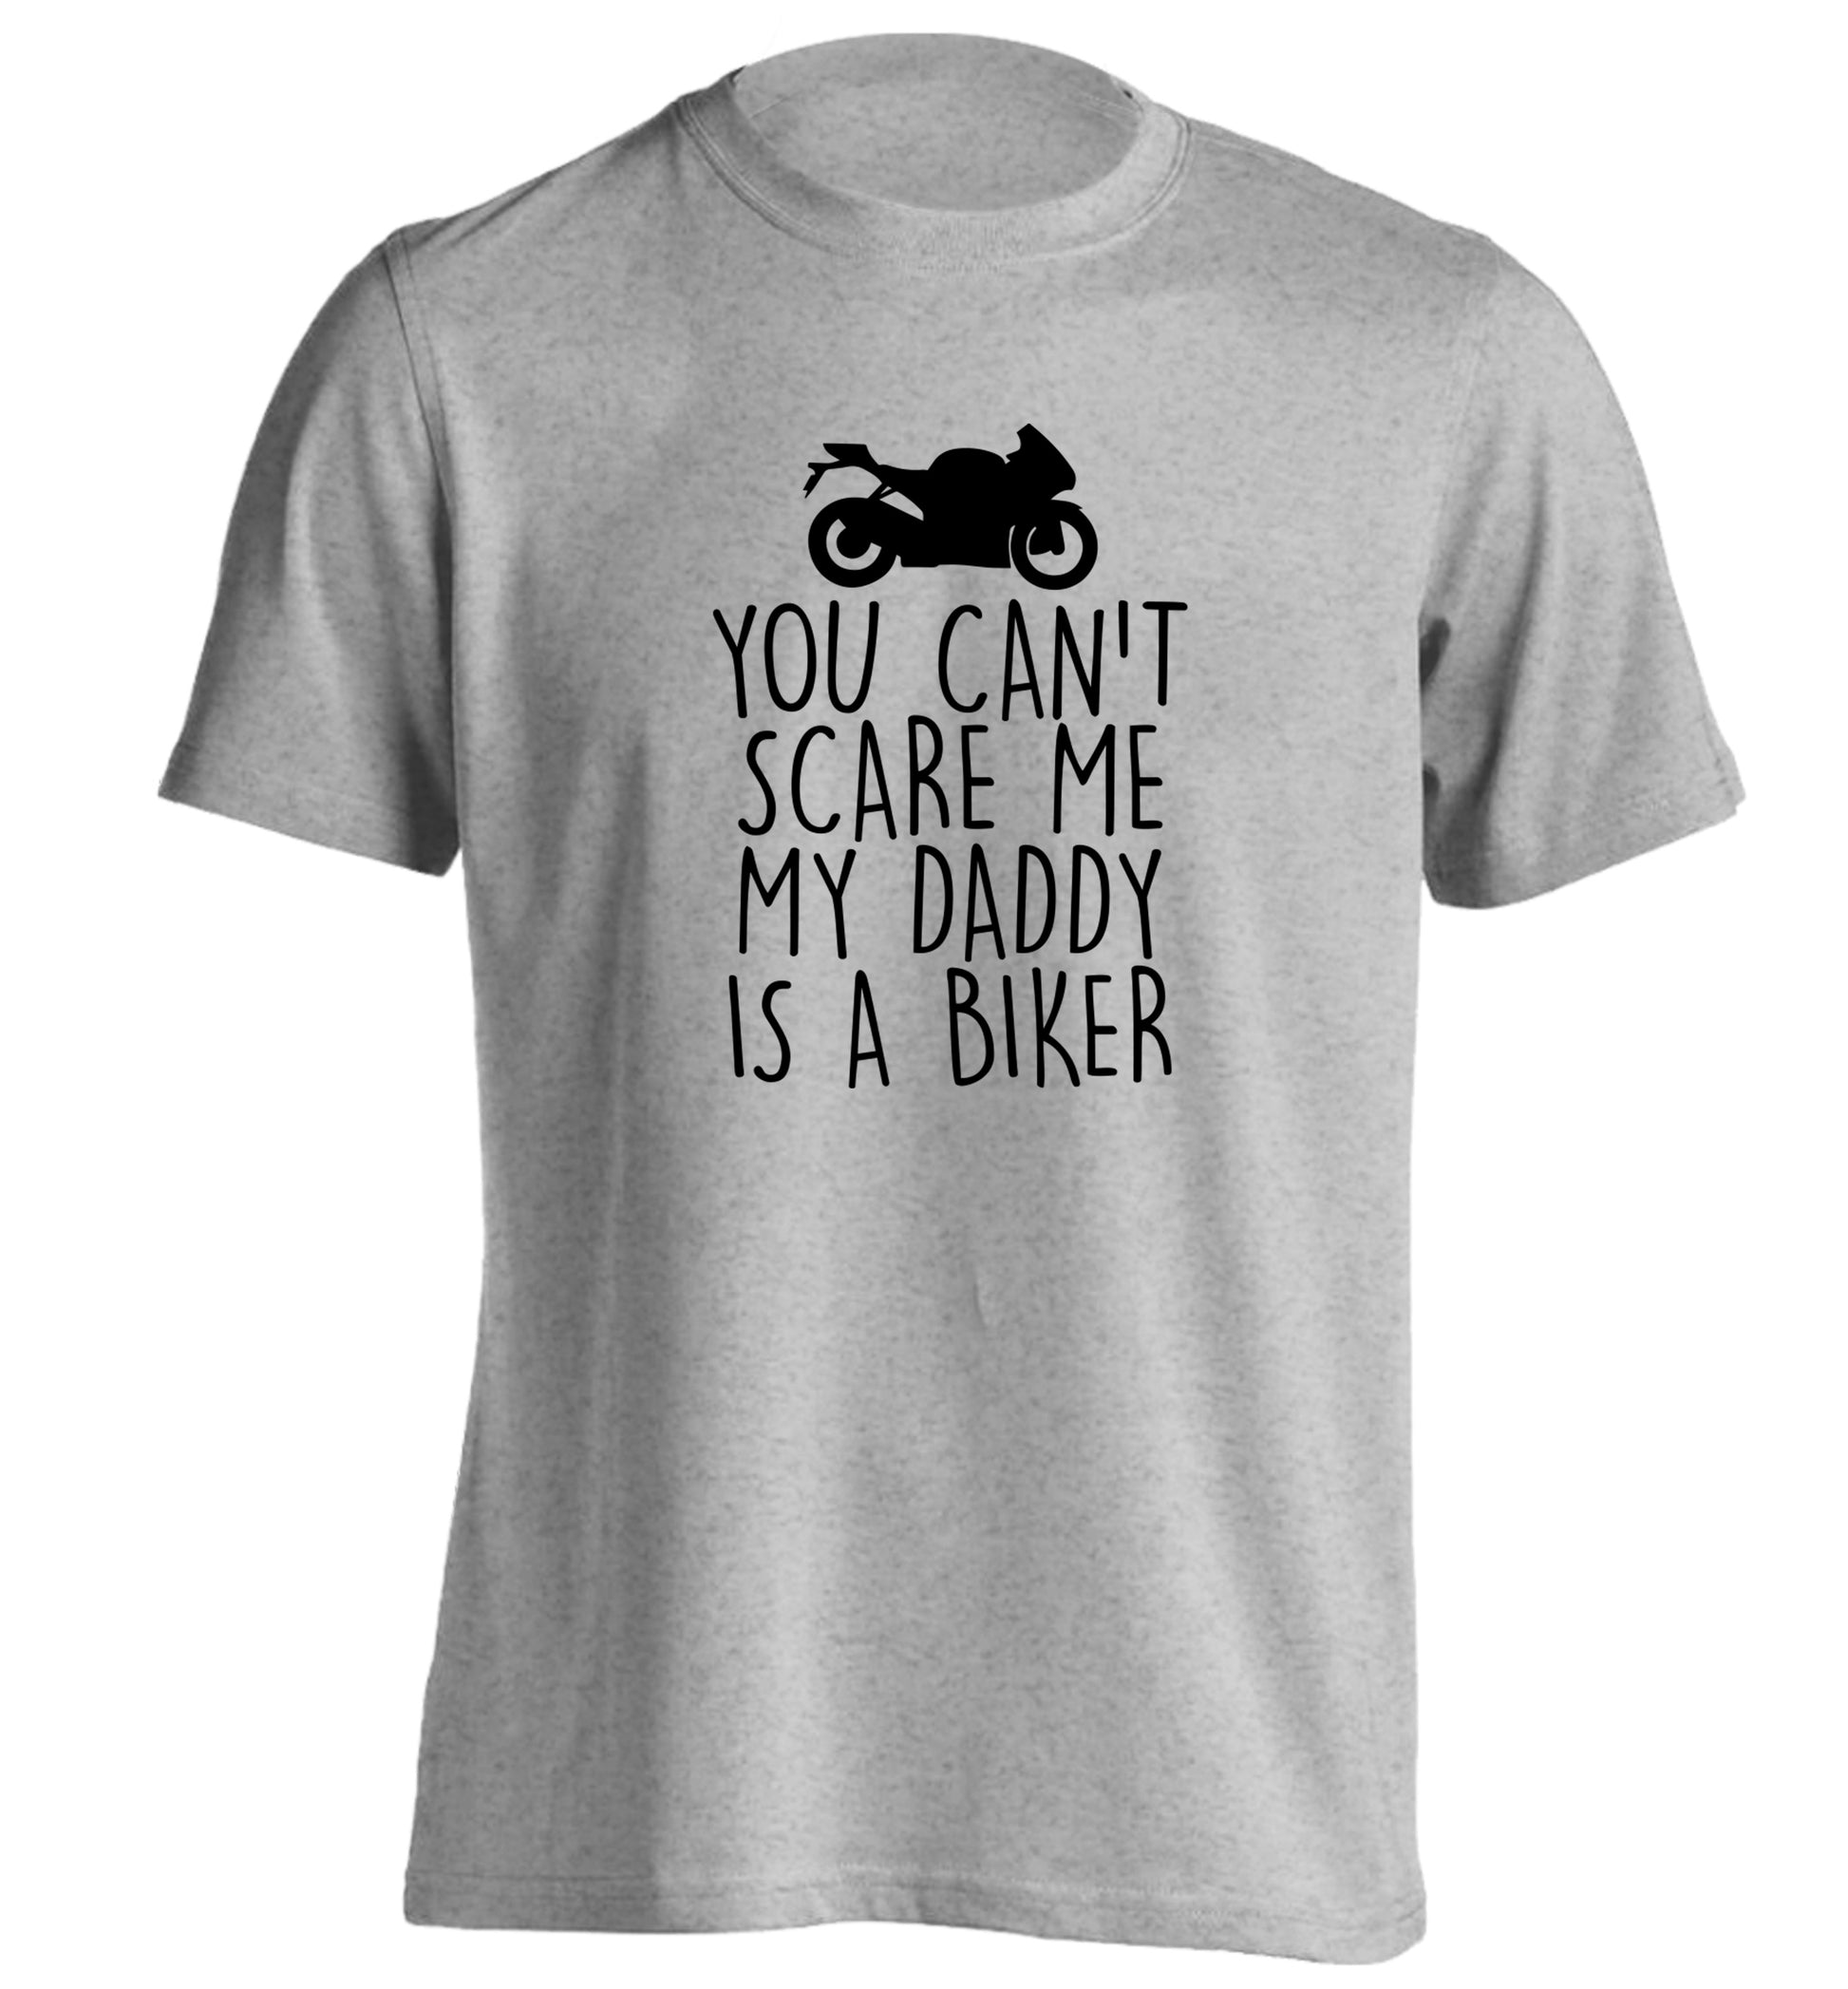 You can't scare me my daddy is a biker adults unisex grey Tshirt 2XL